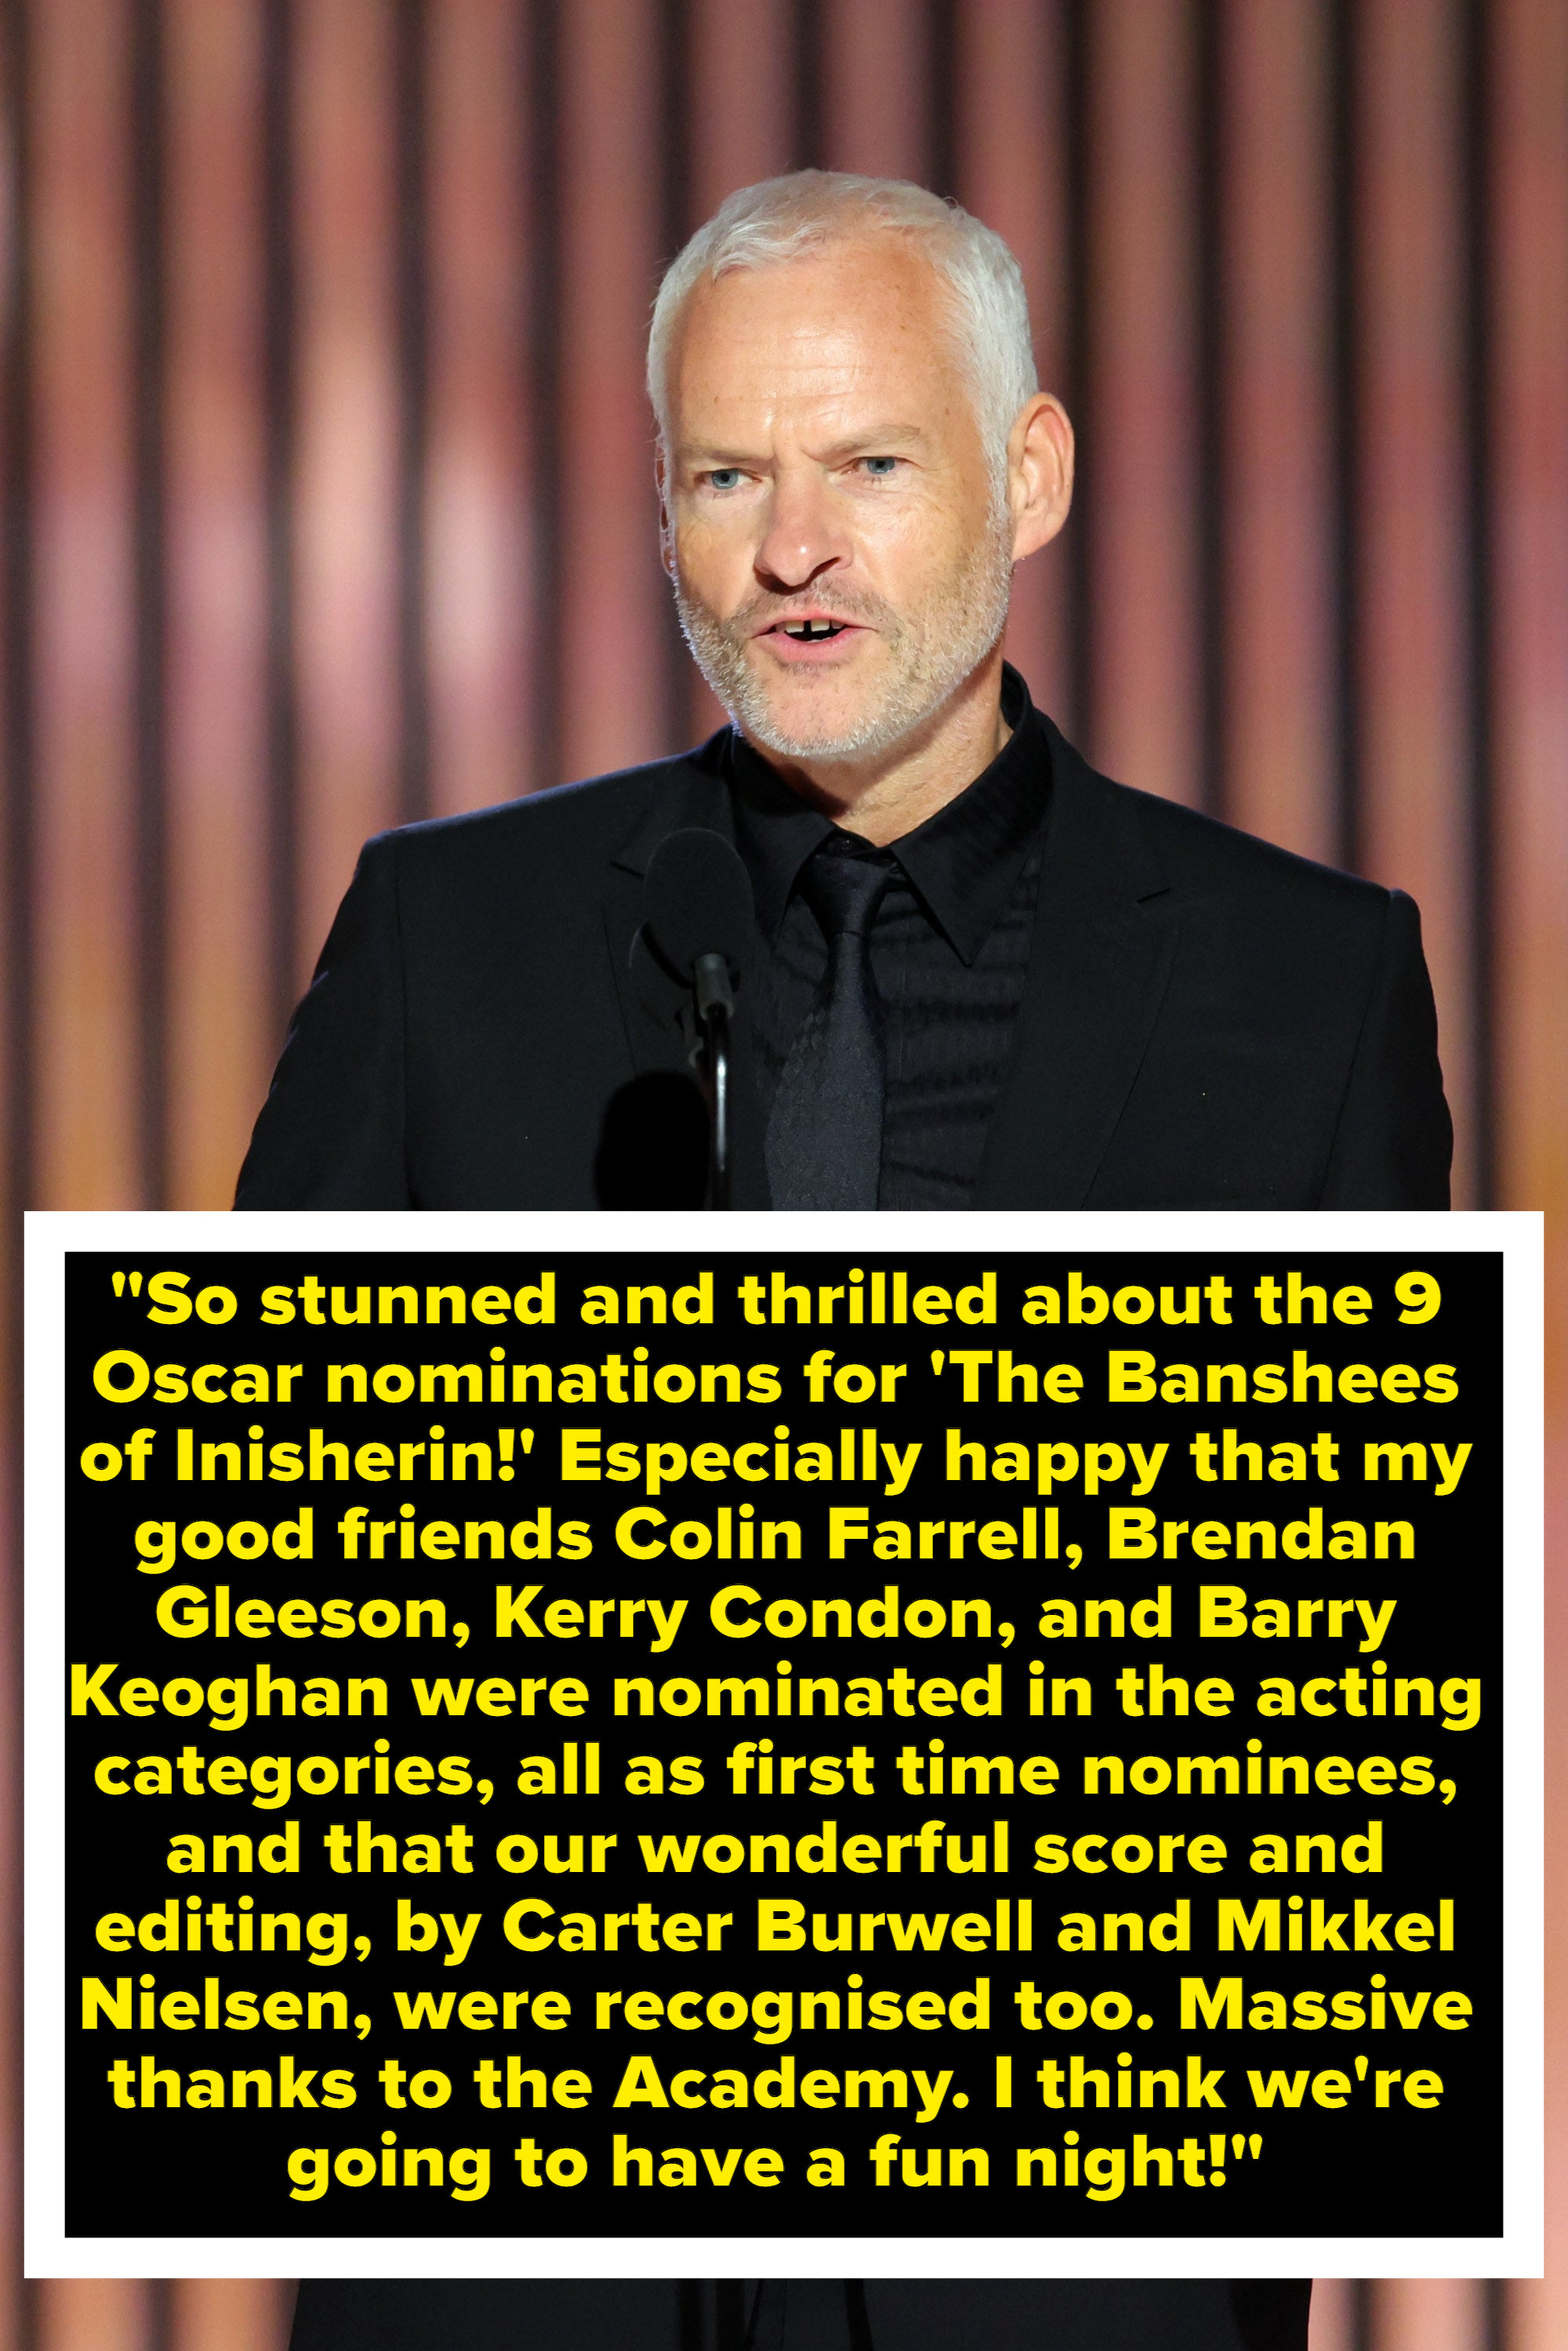 So stunned and thrilled about the 9 Oscar nominations for &#x27;The Banshees of Inisherin!&#x27;